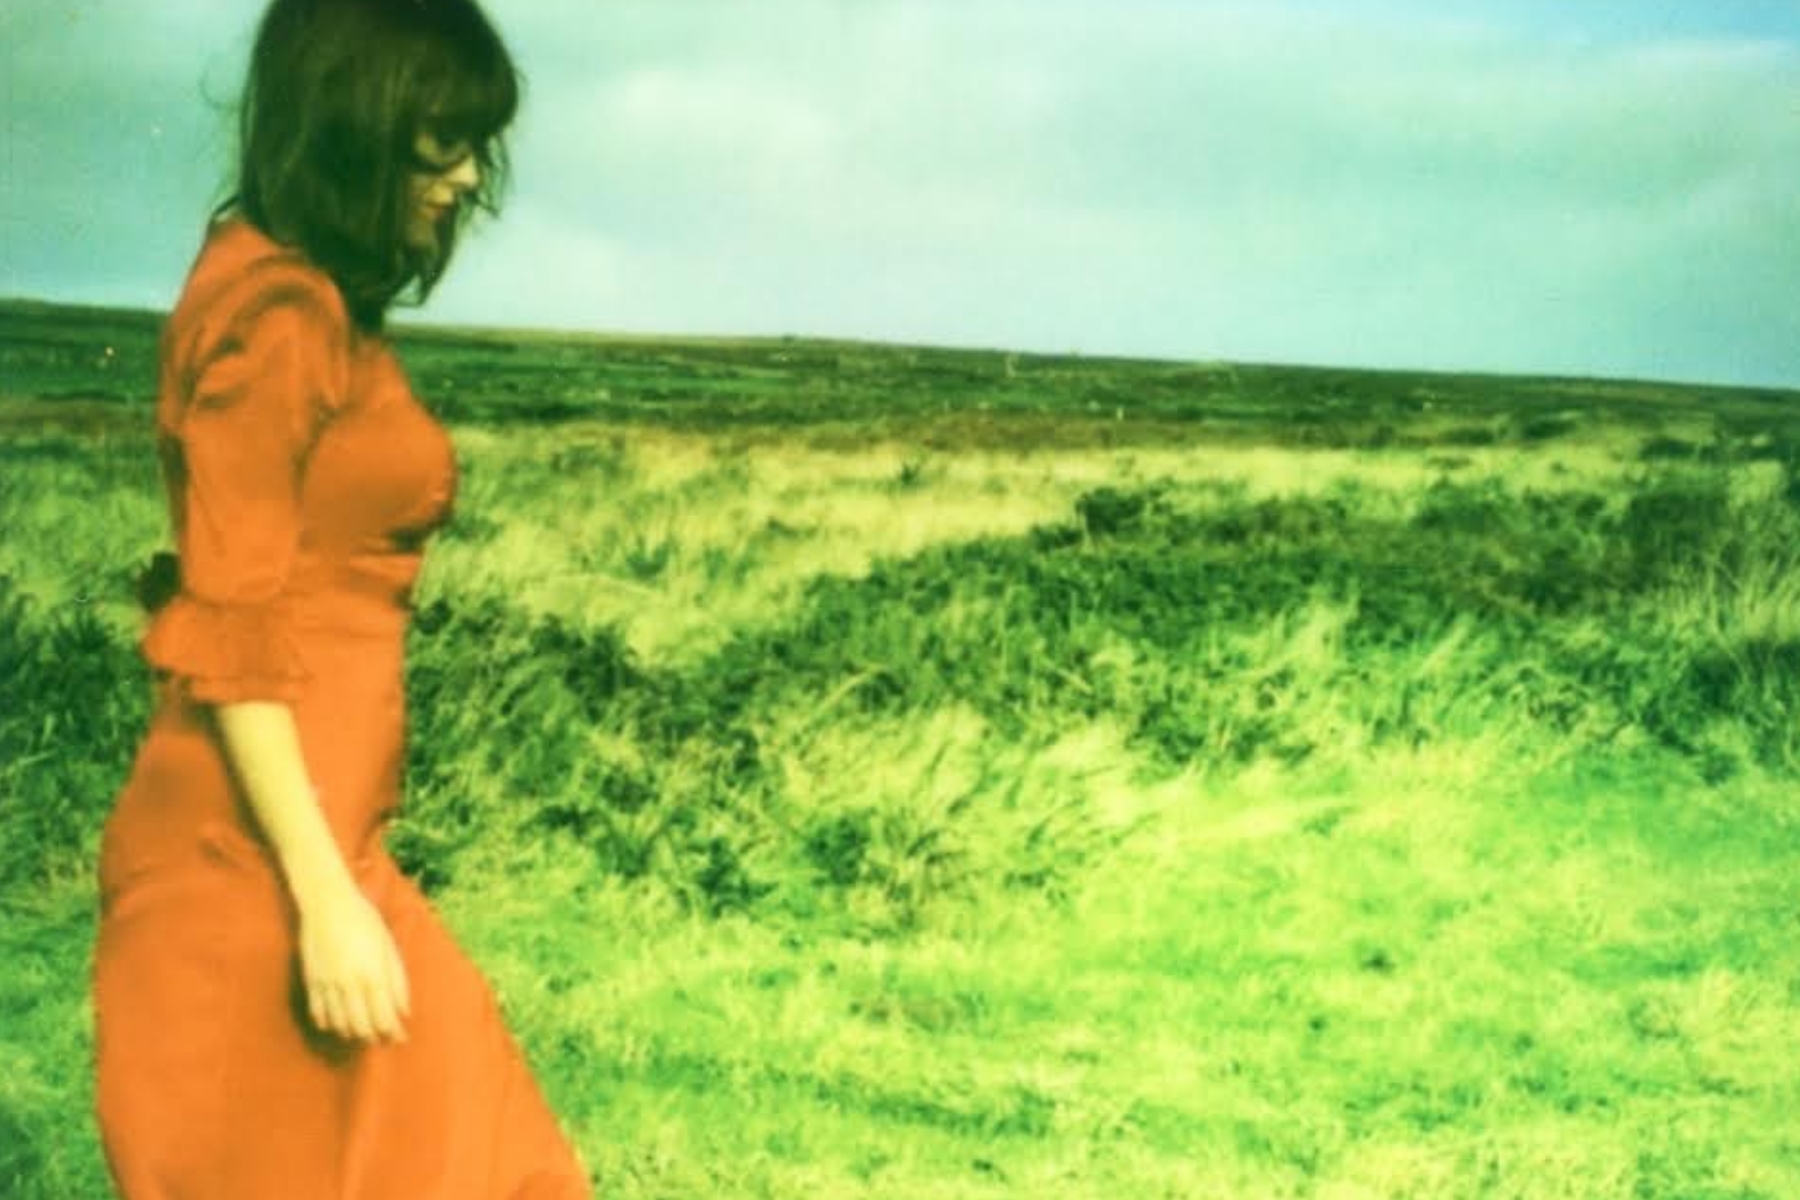 NEWS: Gwenno shares intoxicating new track 'Men An Toll' & UK Dates